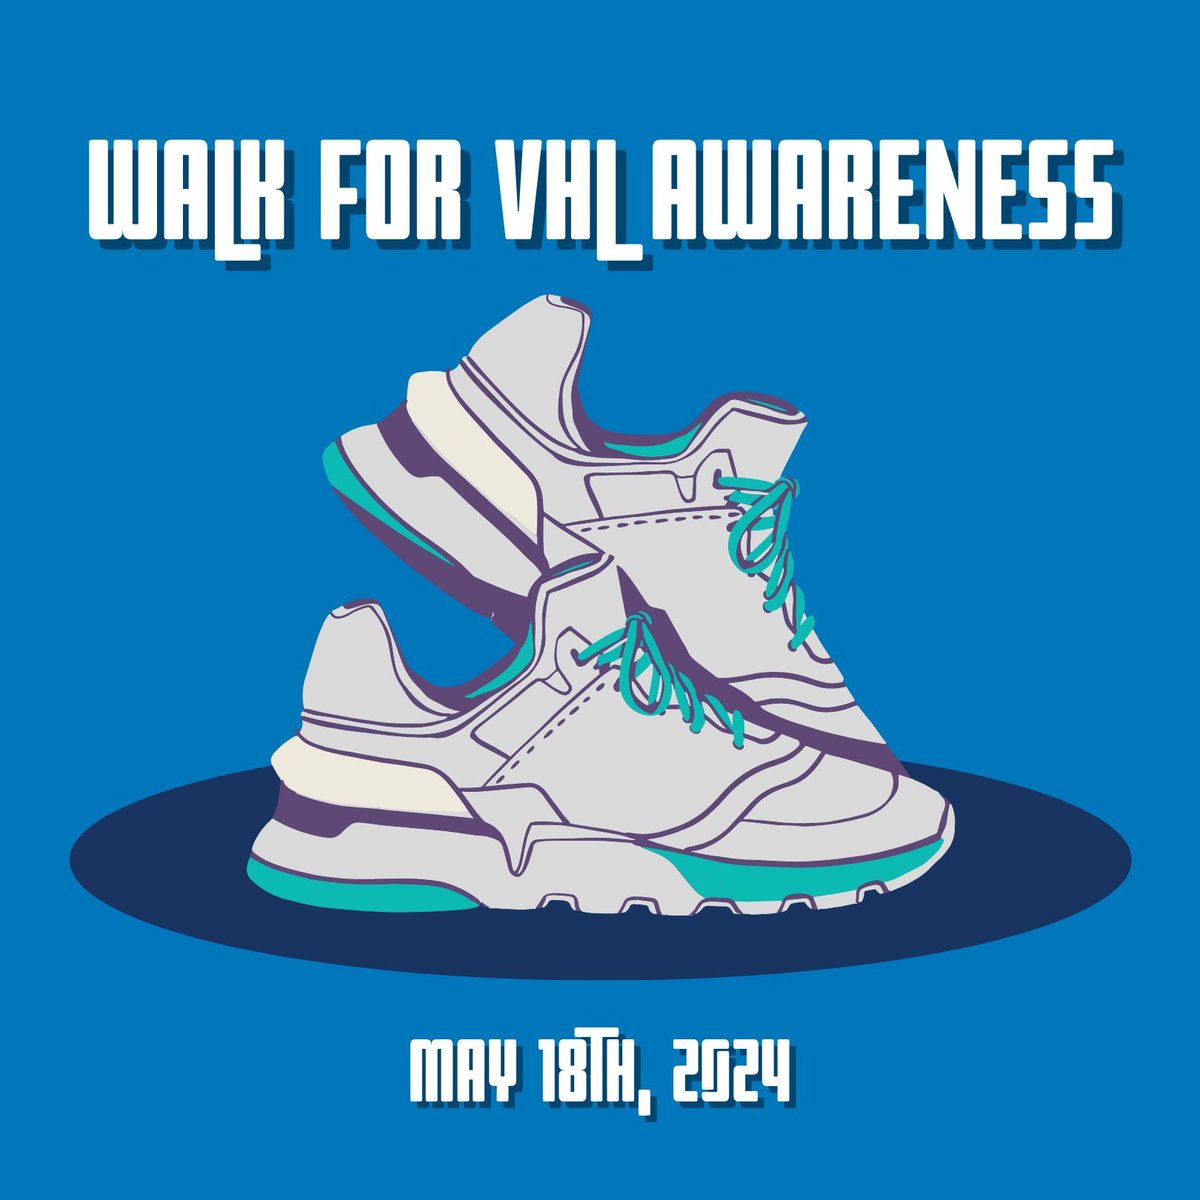 Get your walking shoes laced up - The VHL Awareness Month walk is on May 18th! Help us raise $25k to support critical patient support programs. Register here: buff.ly/3v6TK1Y